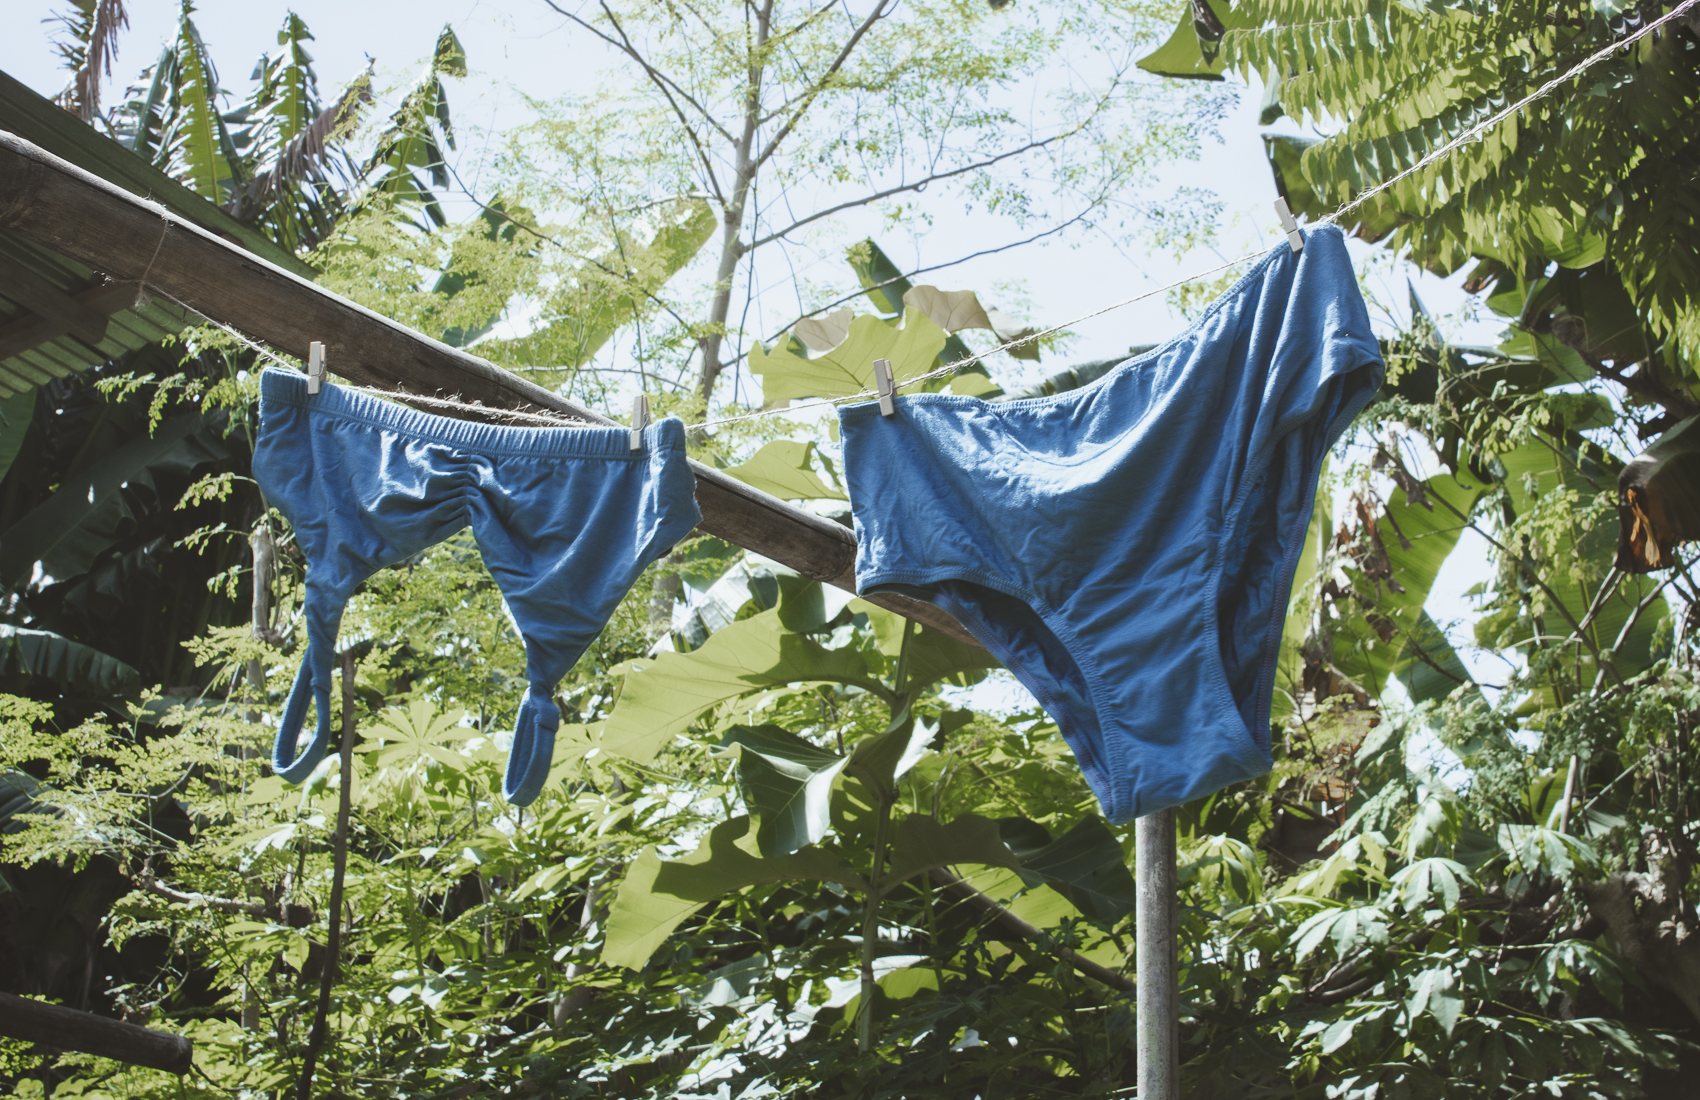 Hanging clothes to dry dye